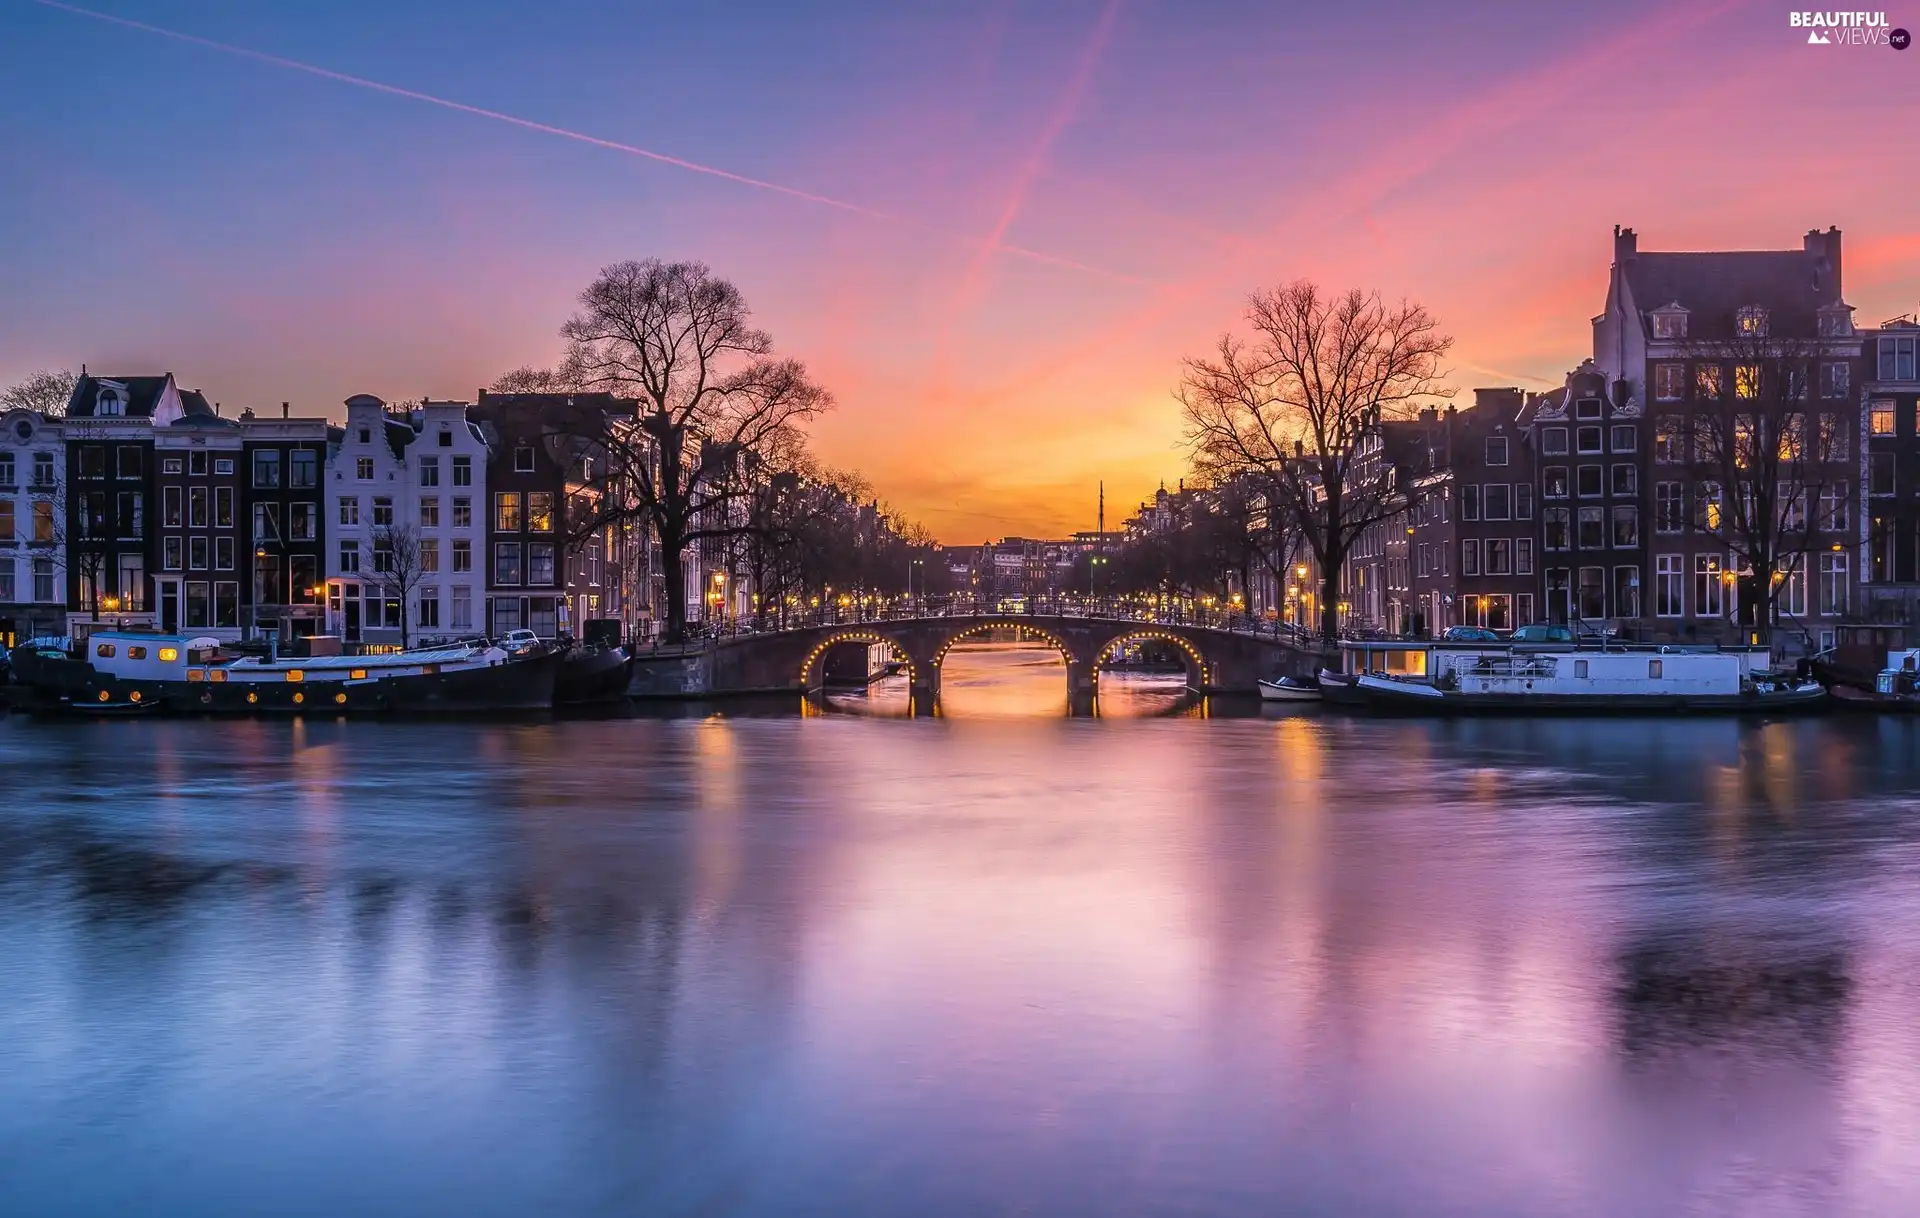 Great Sunsets, bridge, Town, River